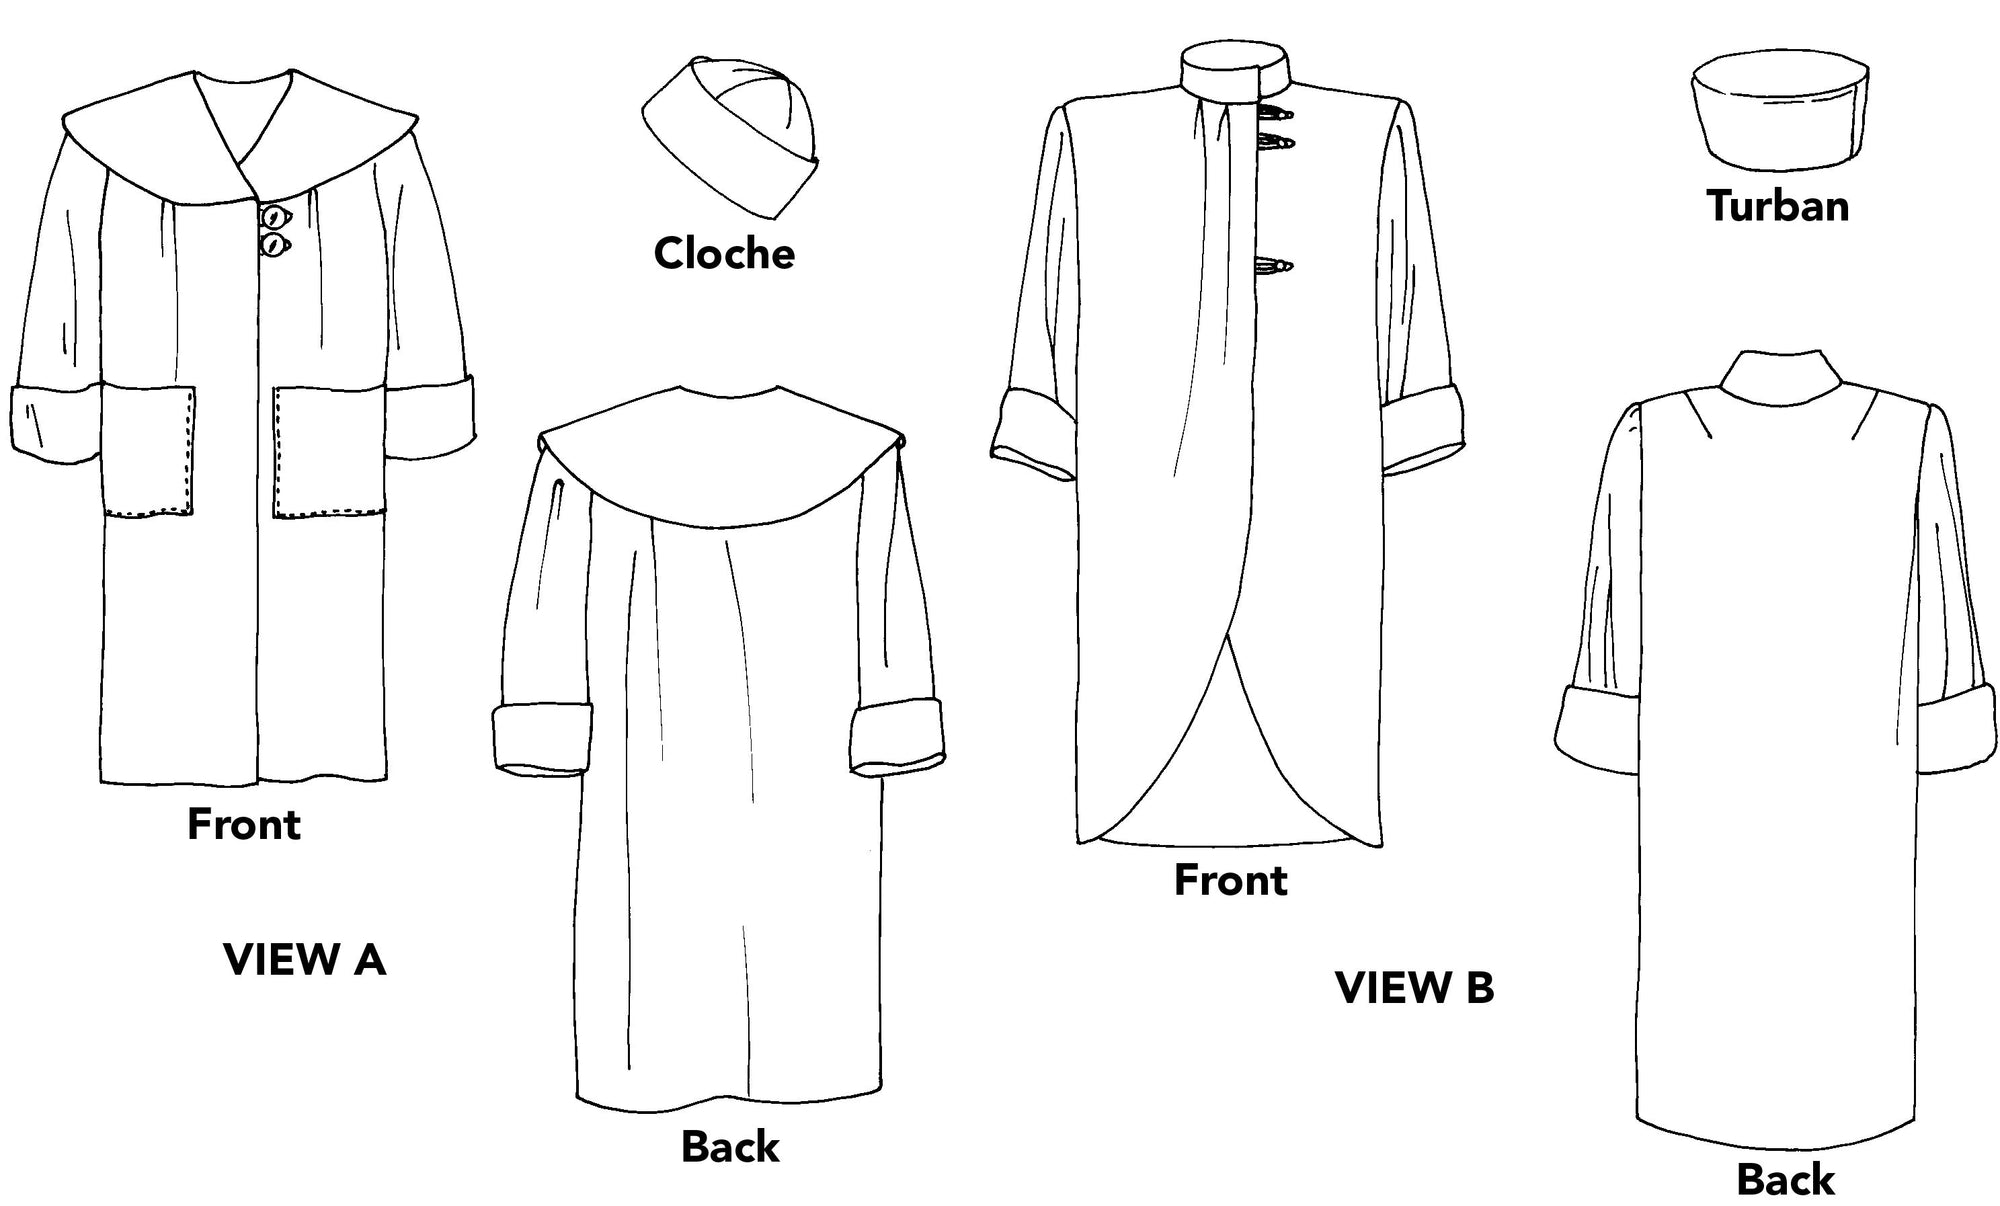 Black and white flat drawings of coats and hat.